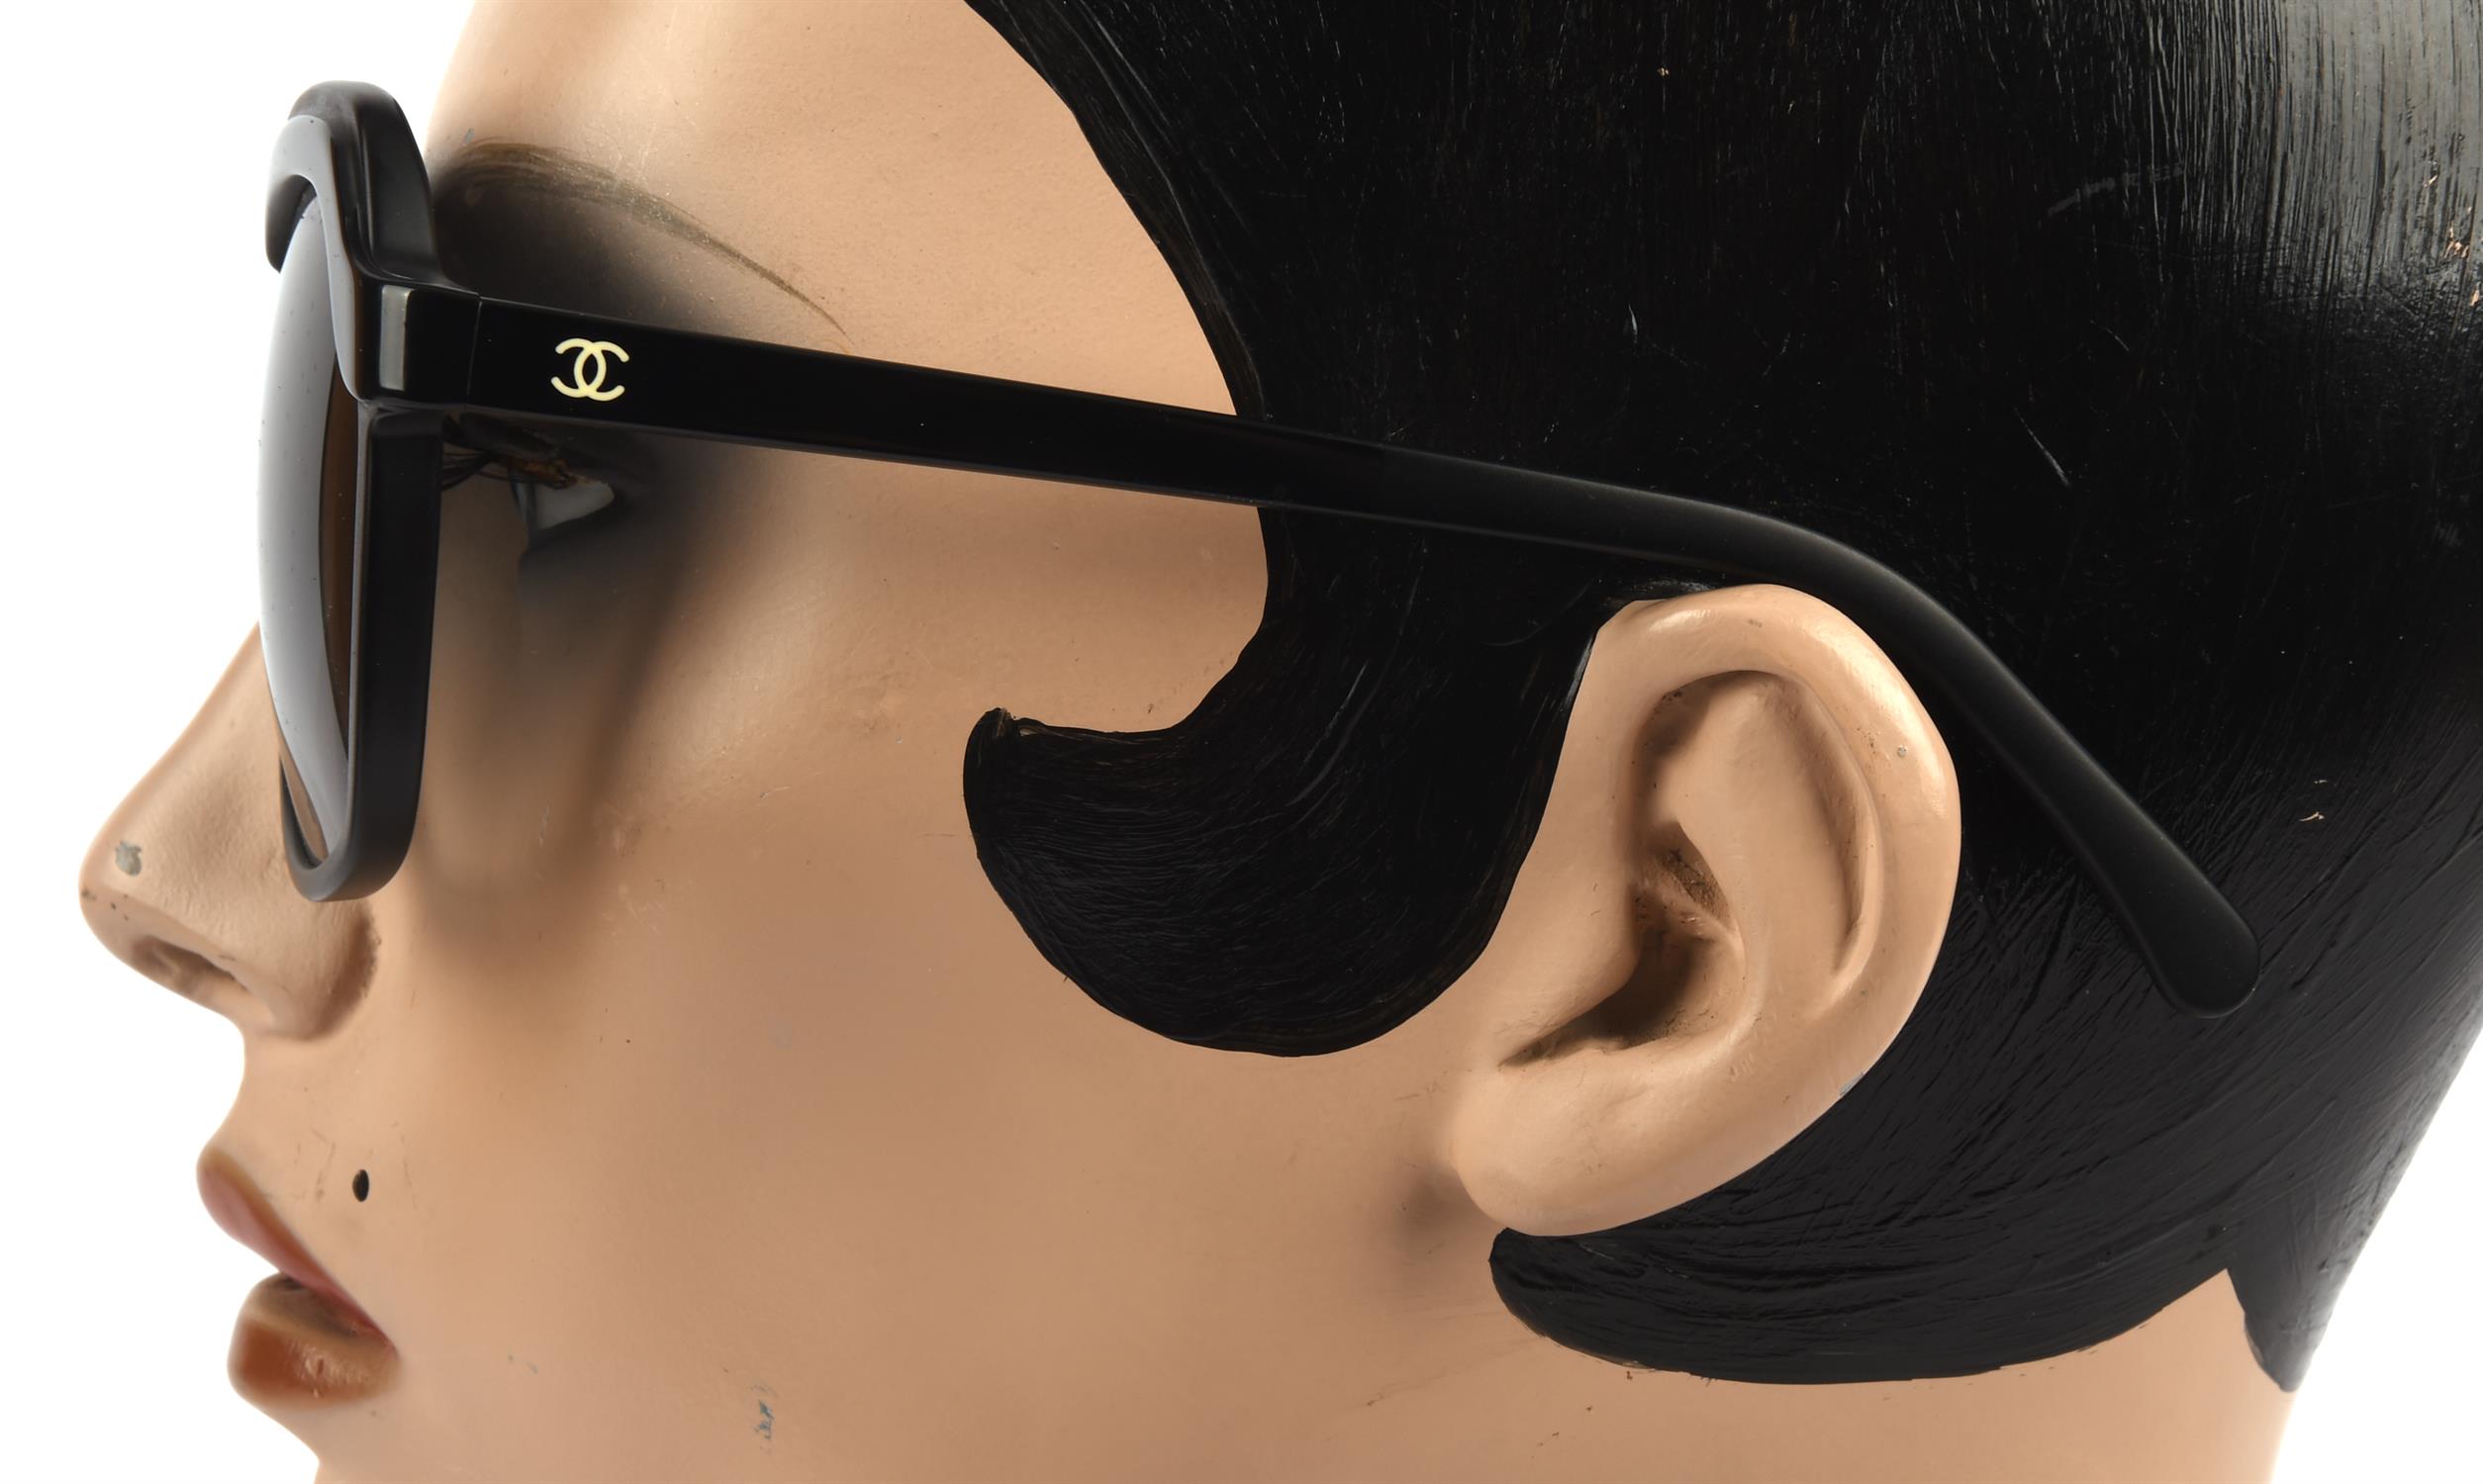 CHANEL a pair of ladies sunglasses in a black quilted case - Image 2 of 4